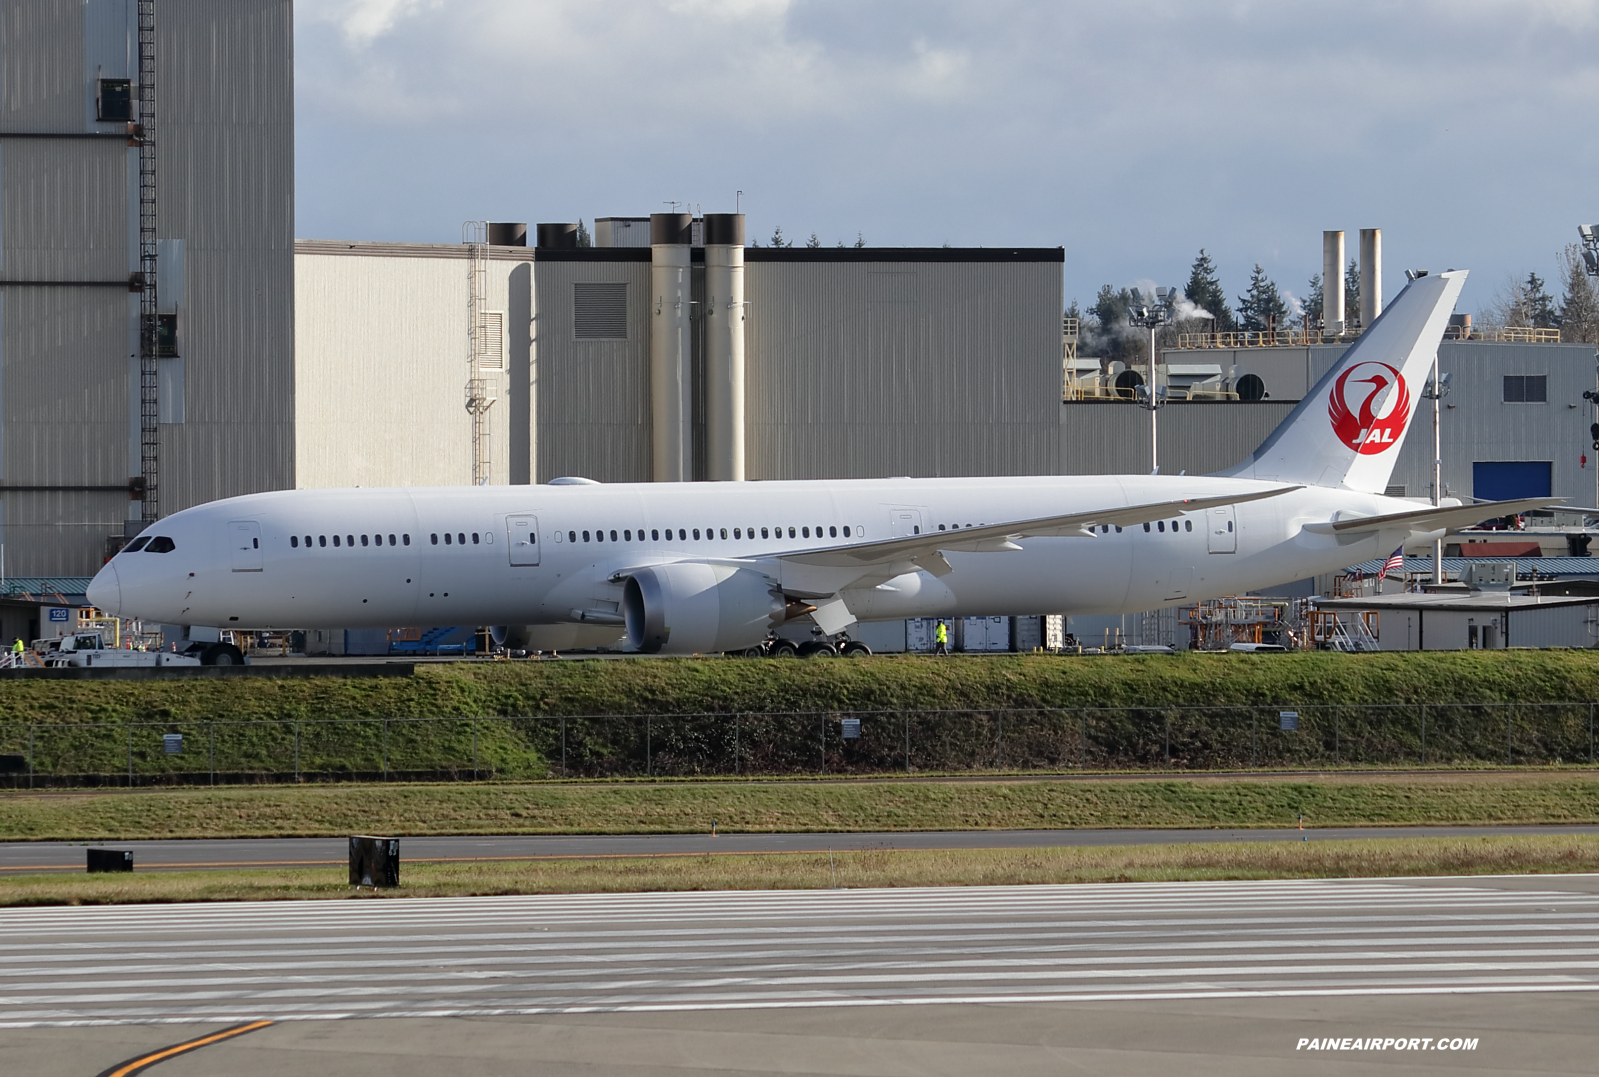 Japan Airlines 787-9 line 1059 at KPAE Paine Field